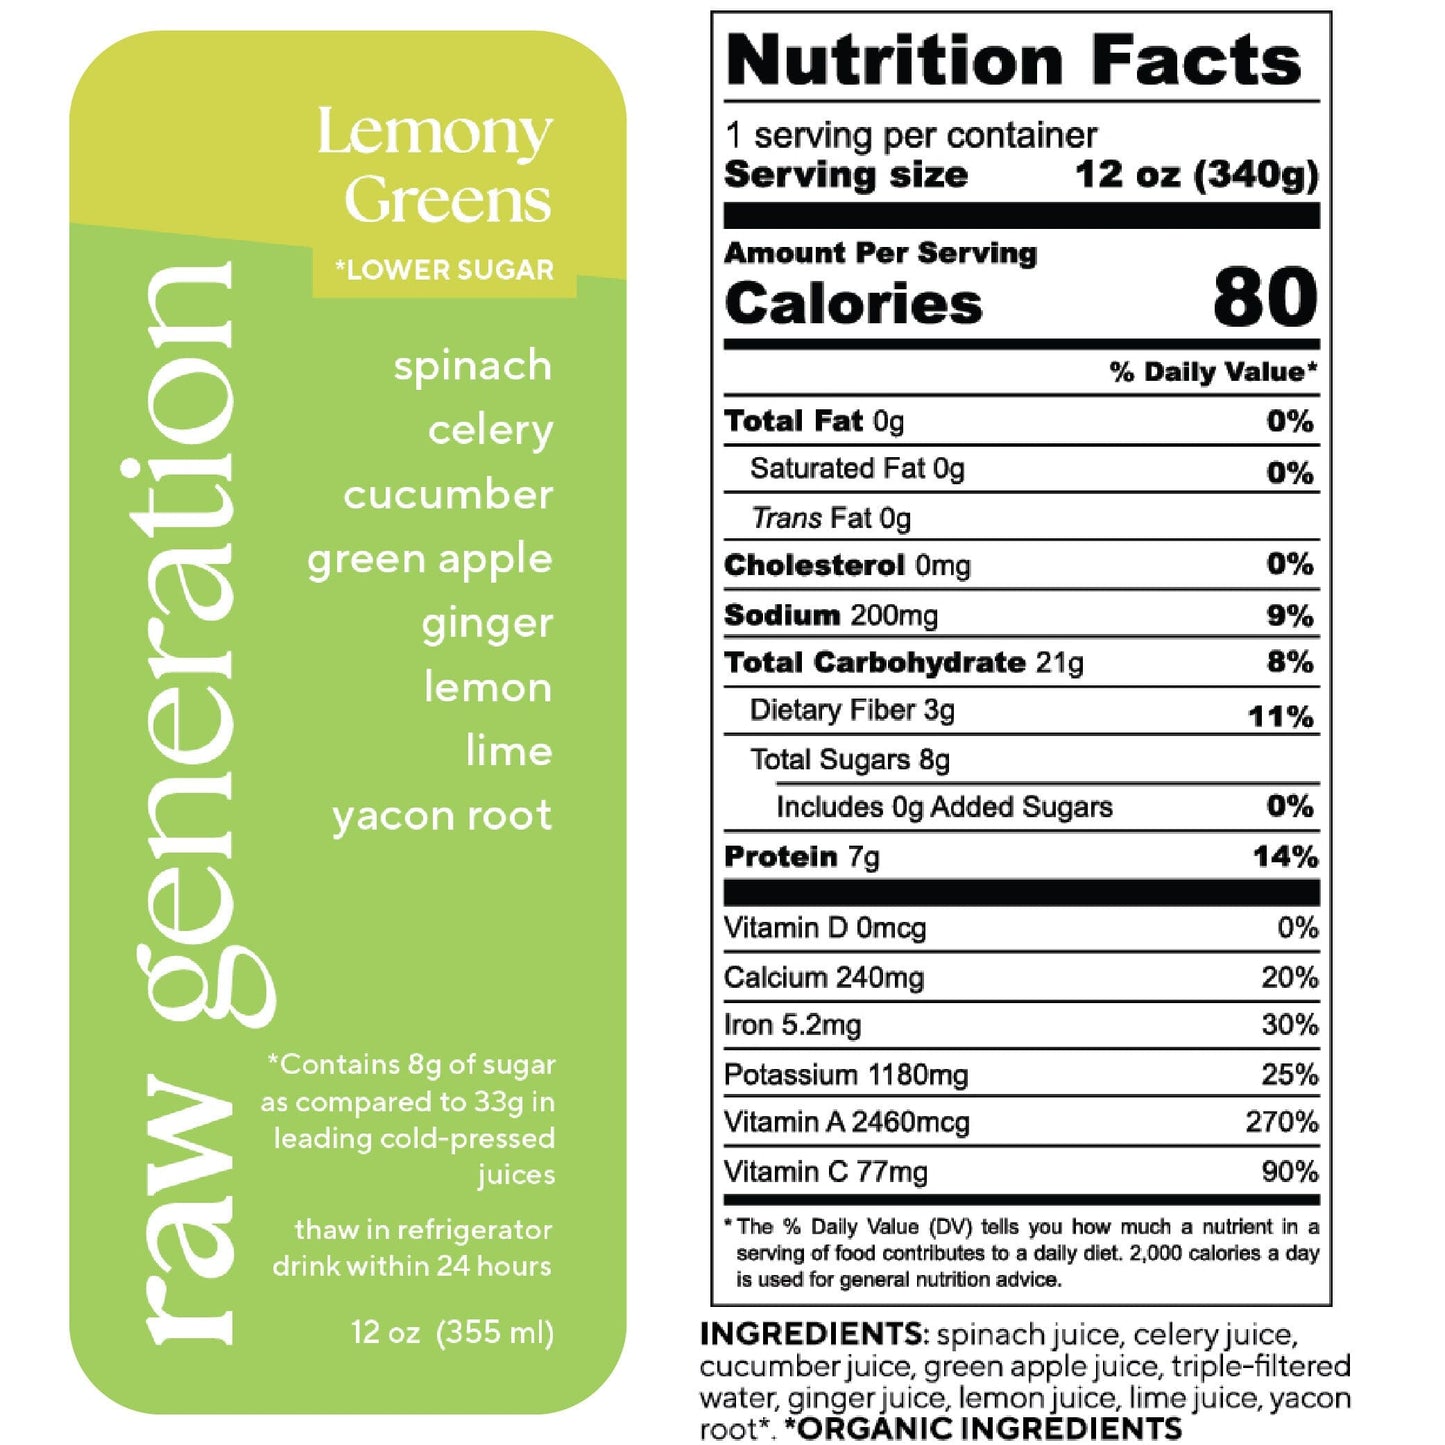 Nutrition Facts, 1 serving/container, 12 oz (340g), Calories 80, Total Fat 0g, Saturated Fat 0g, Trans Fat 0g, Cholesterol 0mg, Sodium 200mg, Total Carbohydrate 21g, Dietary Fiber 3g, Total Sugars 8g, Added Sugars 0g, Protein 7g, Vitamin D 0mcg, Calcium 240mg, Iron 5.2mg, Potassium 1180mg, Vitamin A 2460mcg, Vitamin C 77mg; Ingredients: spinach juice, celery juice, cucumber juice, green apple juice, triple-filtered water, ginger juice, lemon juice, lime juice, yacon root (organic).